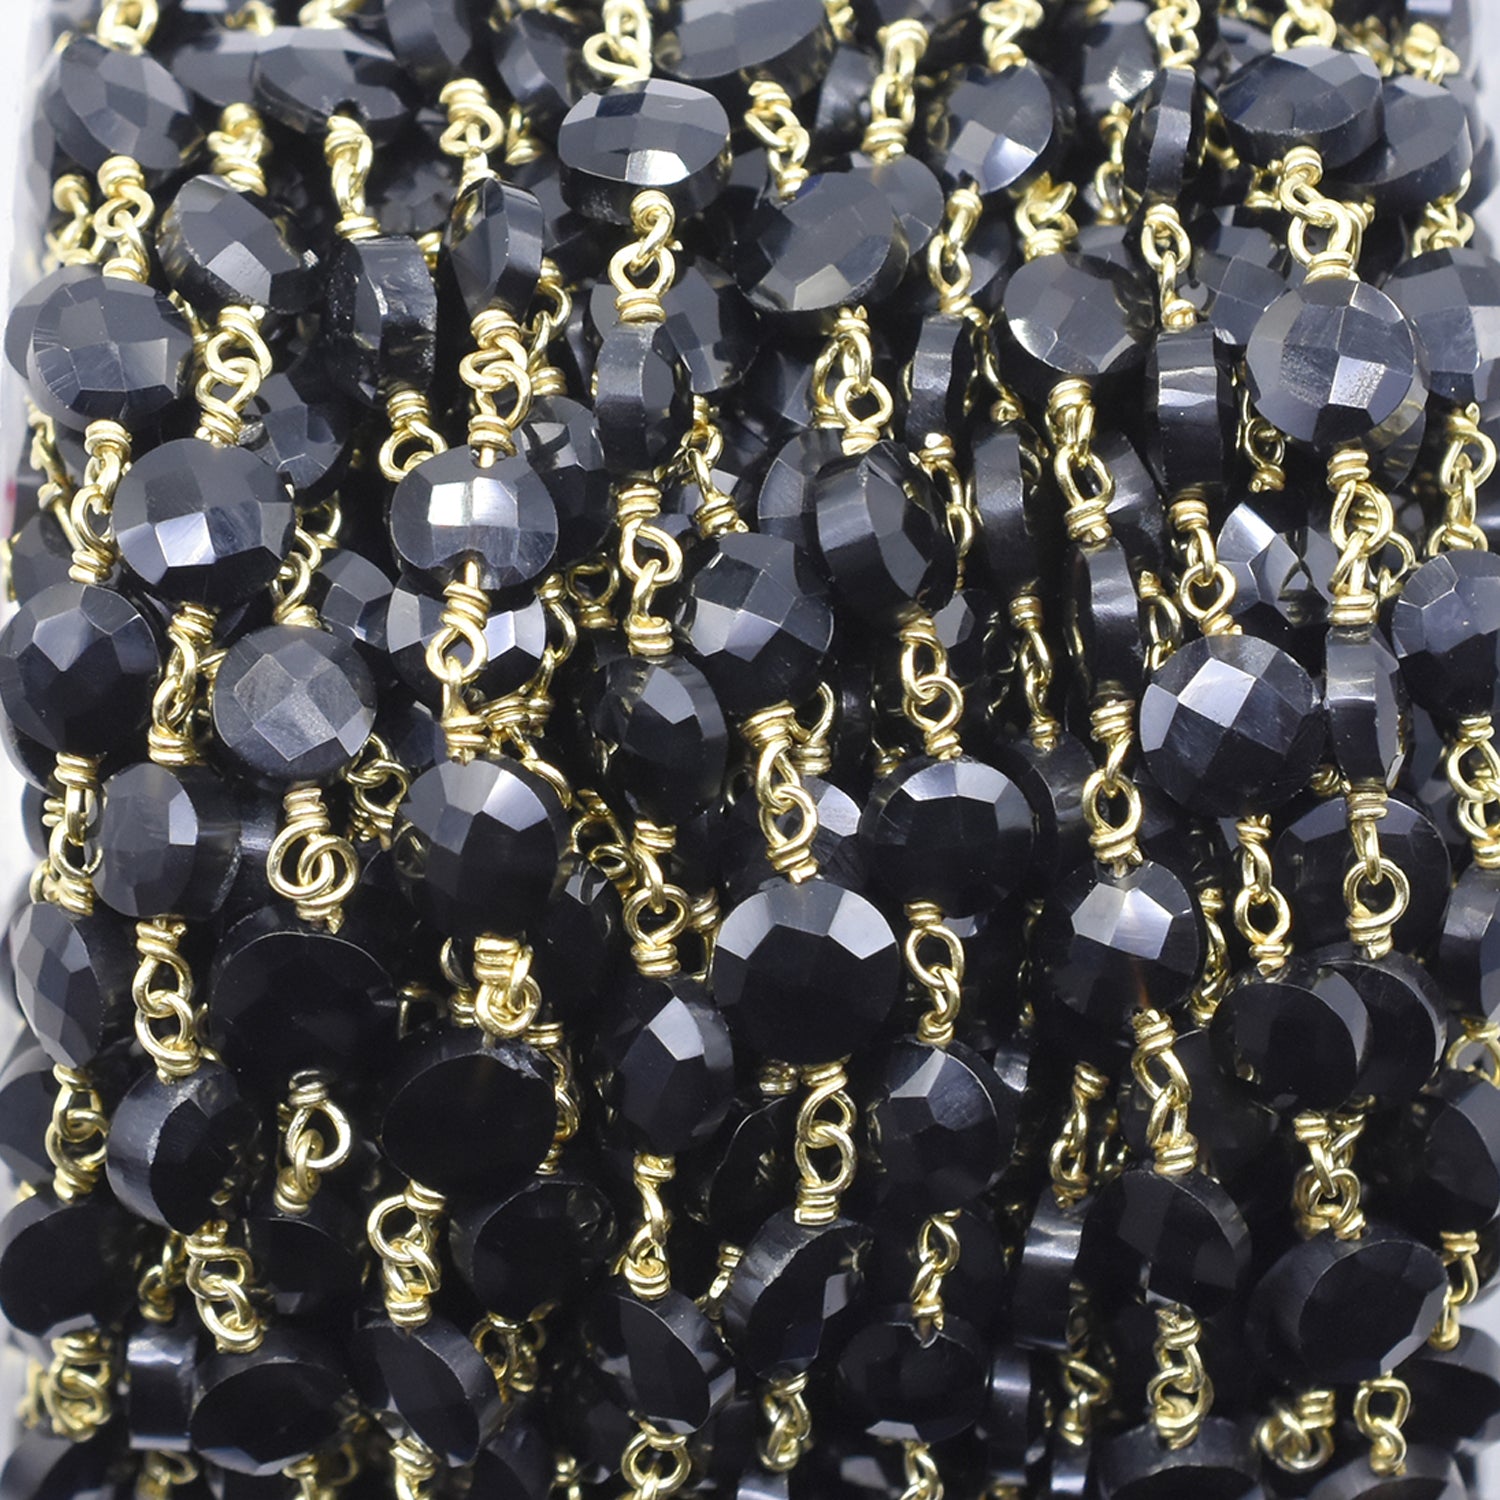 Black Onyx 6 To 7 MM Faceted Coin Sterling Silver Vermeil Rosary Wire Wrap Chain Sold by Foot - Jaipur Gem Factory